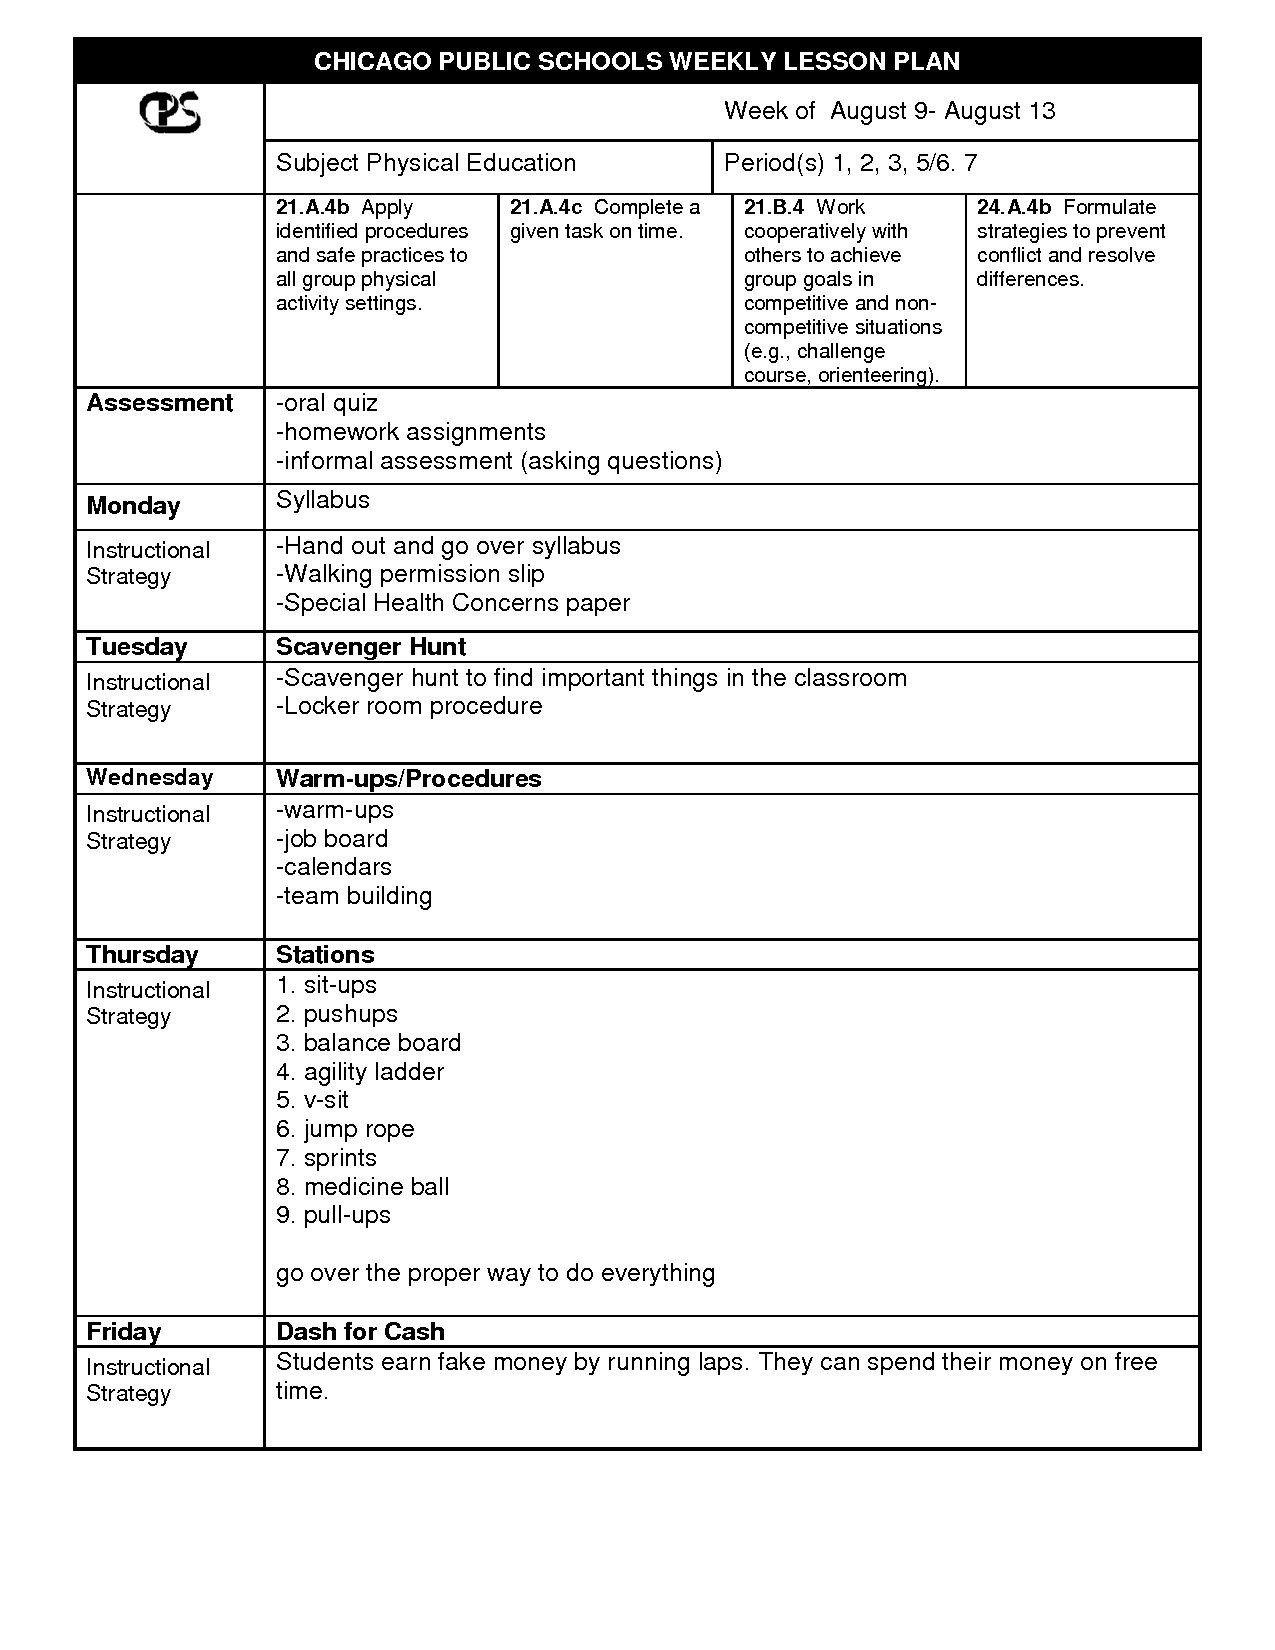 Physical Education Lesson Plan Template 20 Physical Education Lesson Plans Template In 2020 with